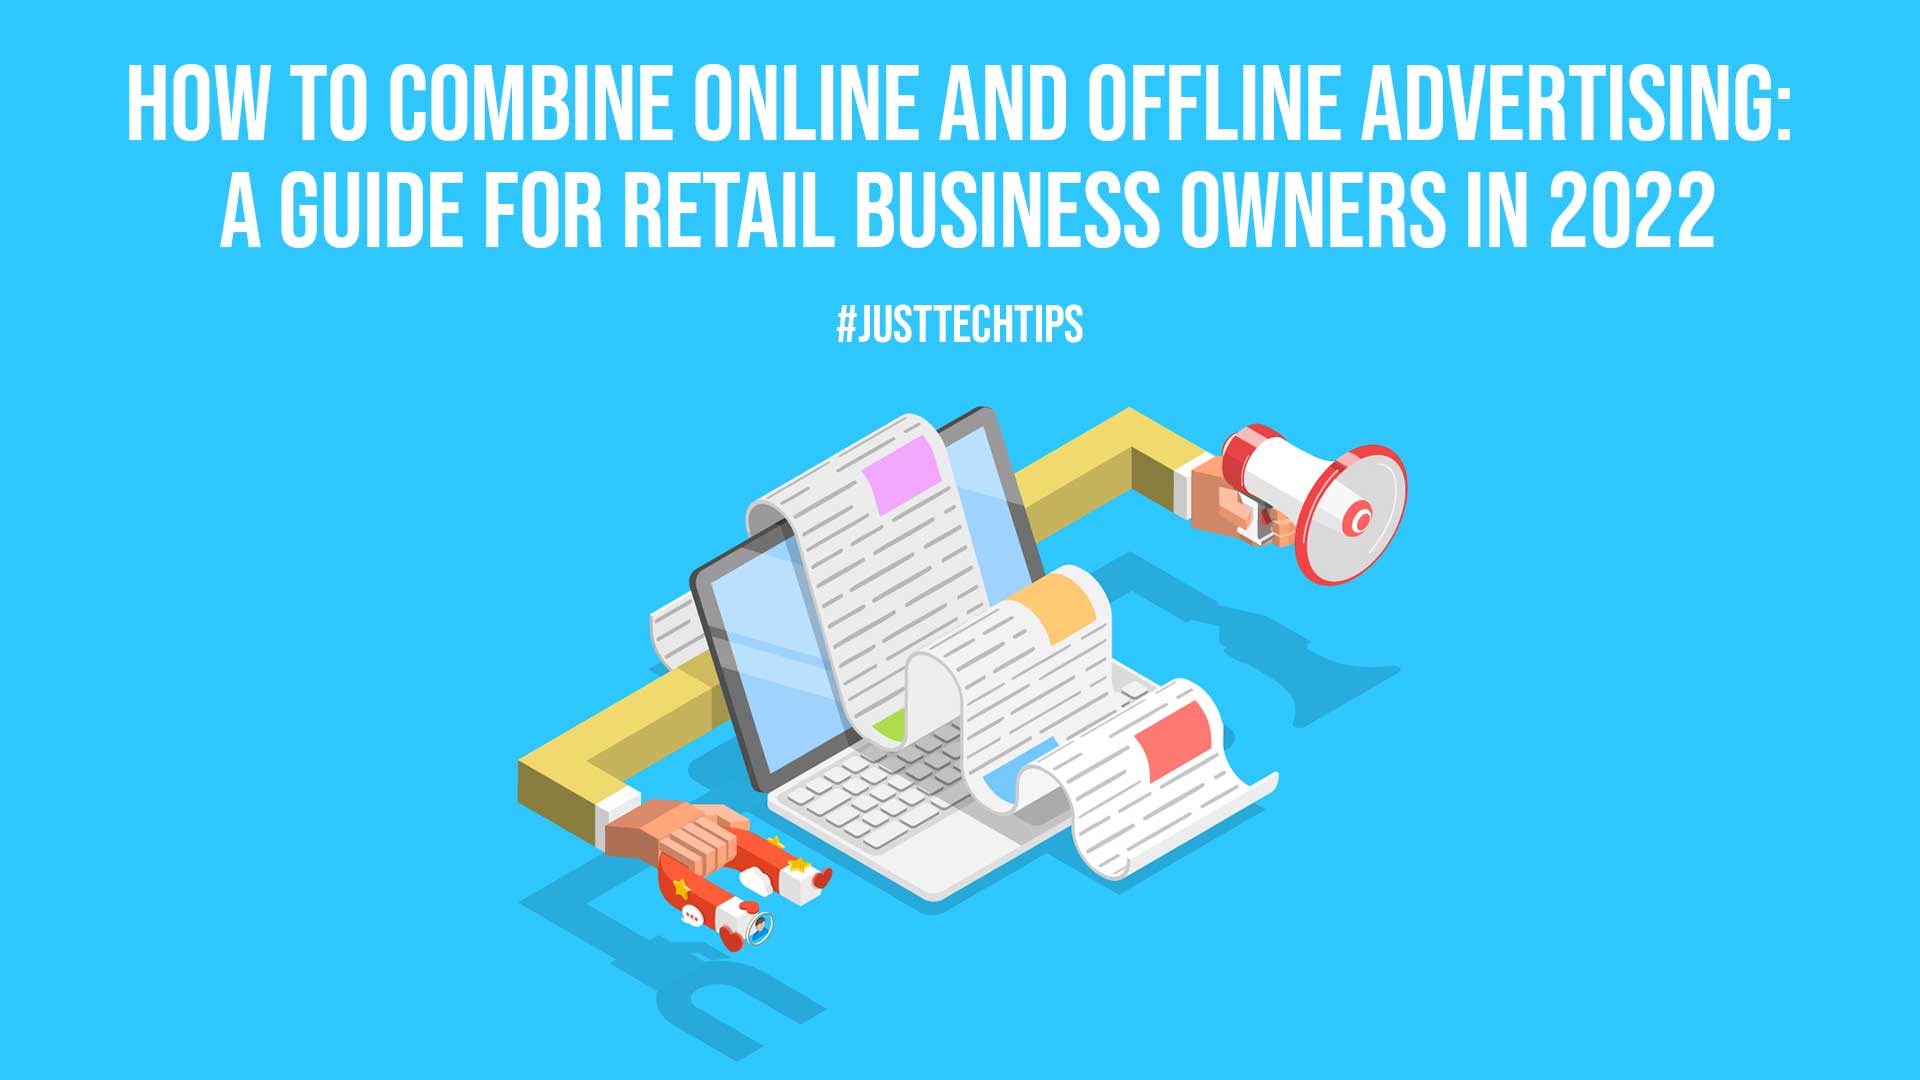 How To Combine Online And Offline Advertising A Guide For Retail Business Owners In 2022